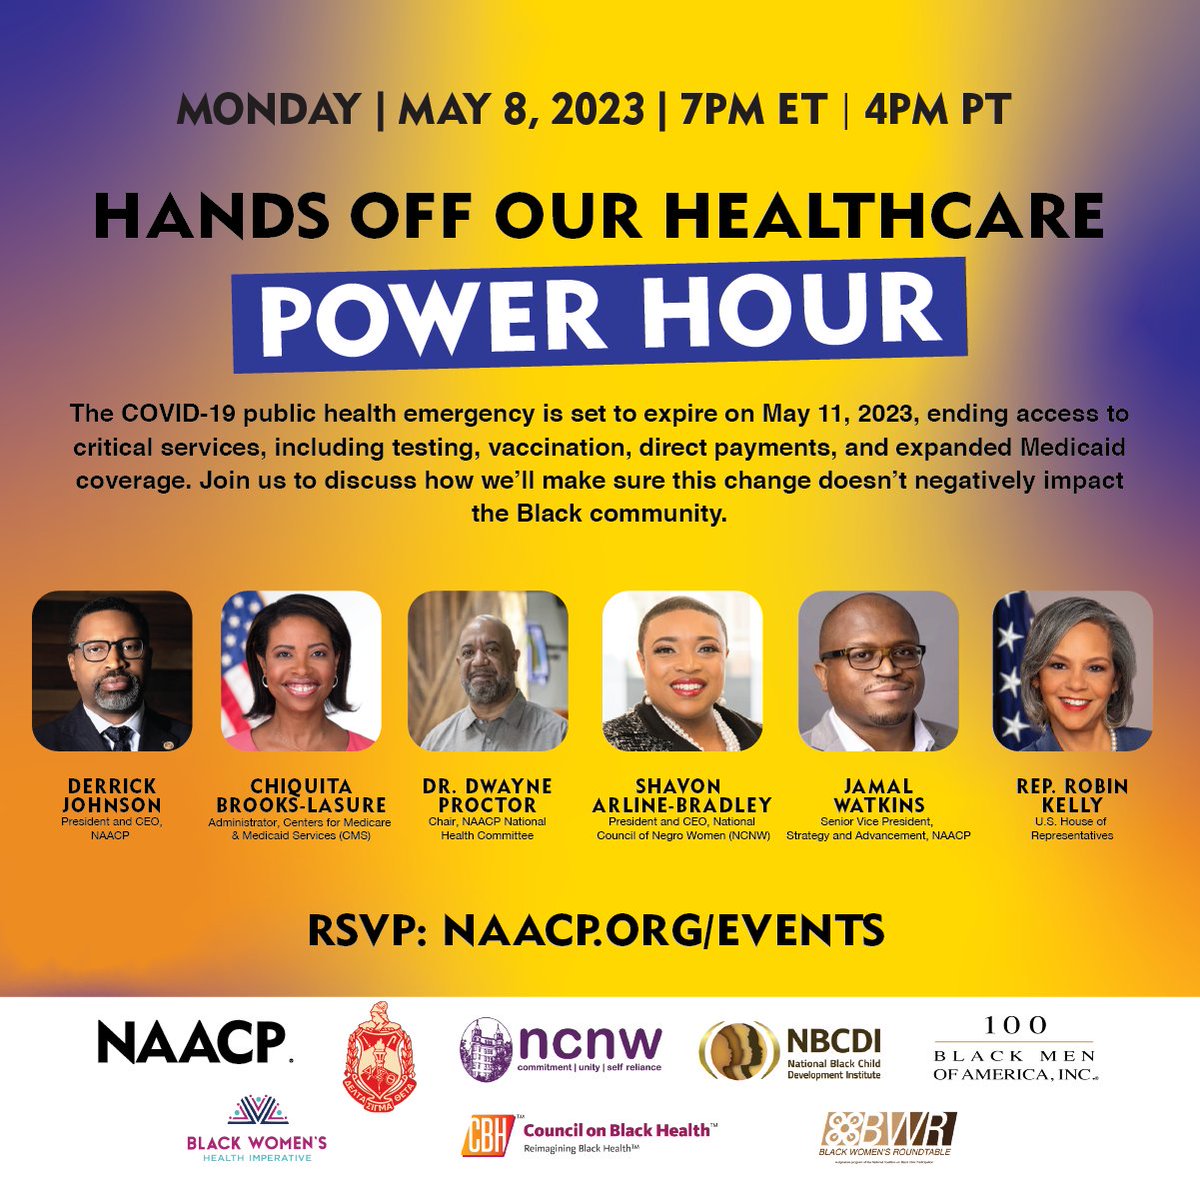 URGENT NEWS 🚨: The Public Health Emergency for #COVID19 is set to expire on May 11, 2023. Join us on Monday, May 8 at 7 p.m. ET to discuss how we'll make sure this change doesn't negatively impact the Black community. RSVP: bit.ly/3LL21hA